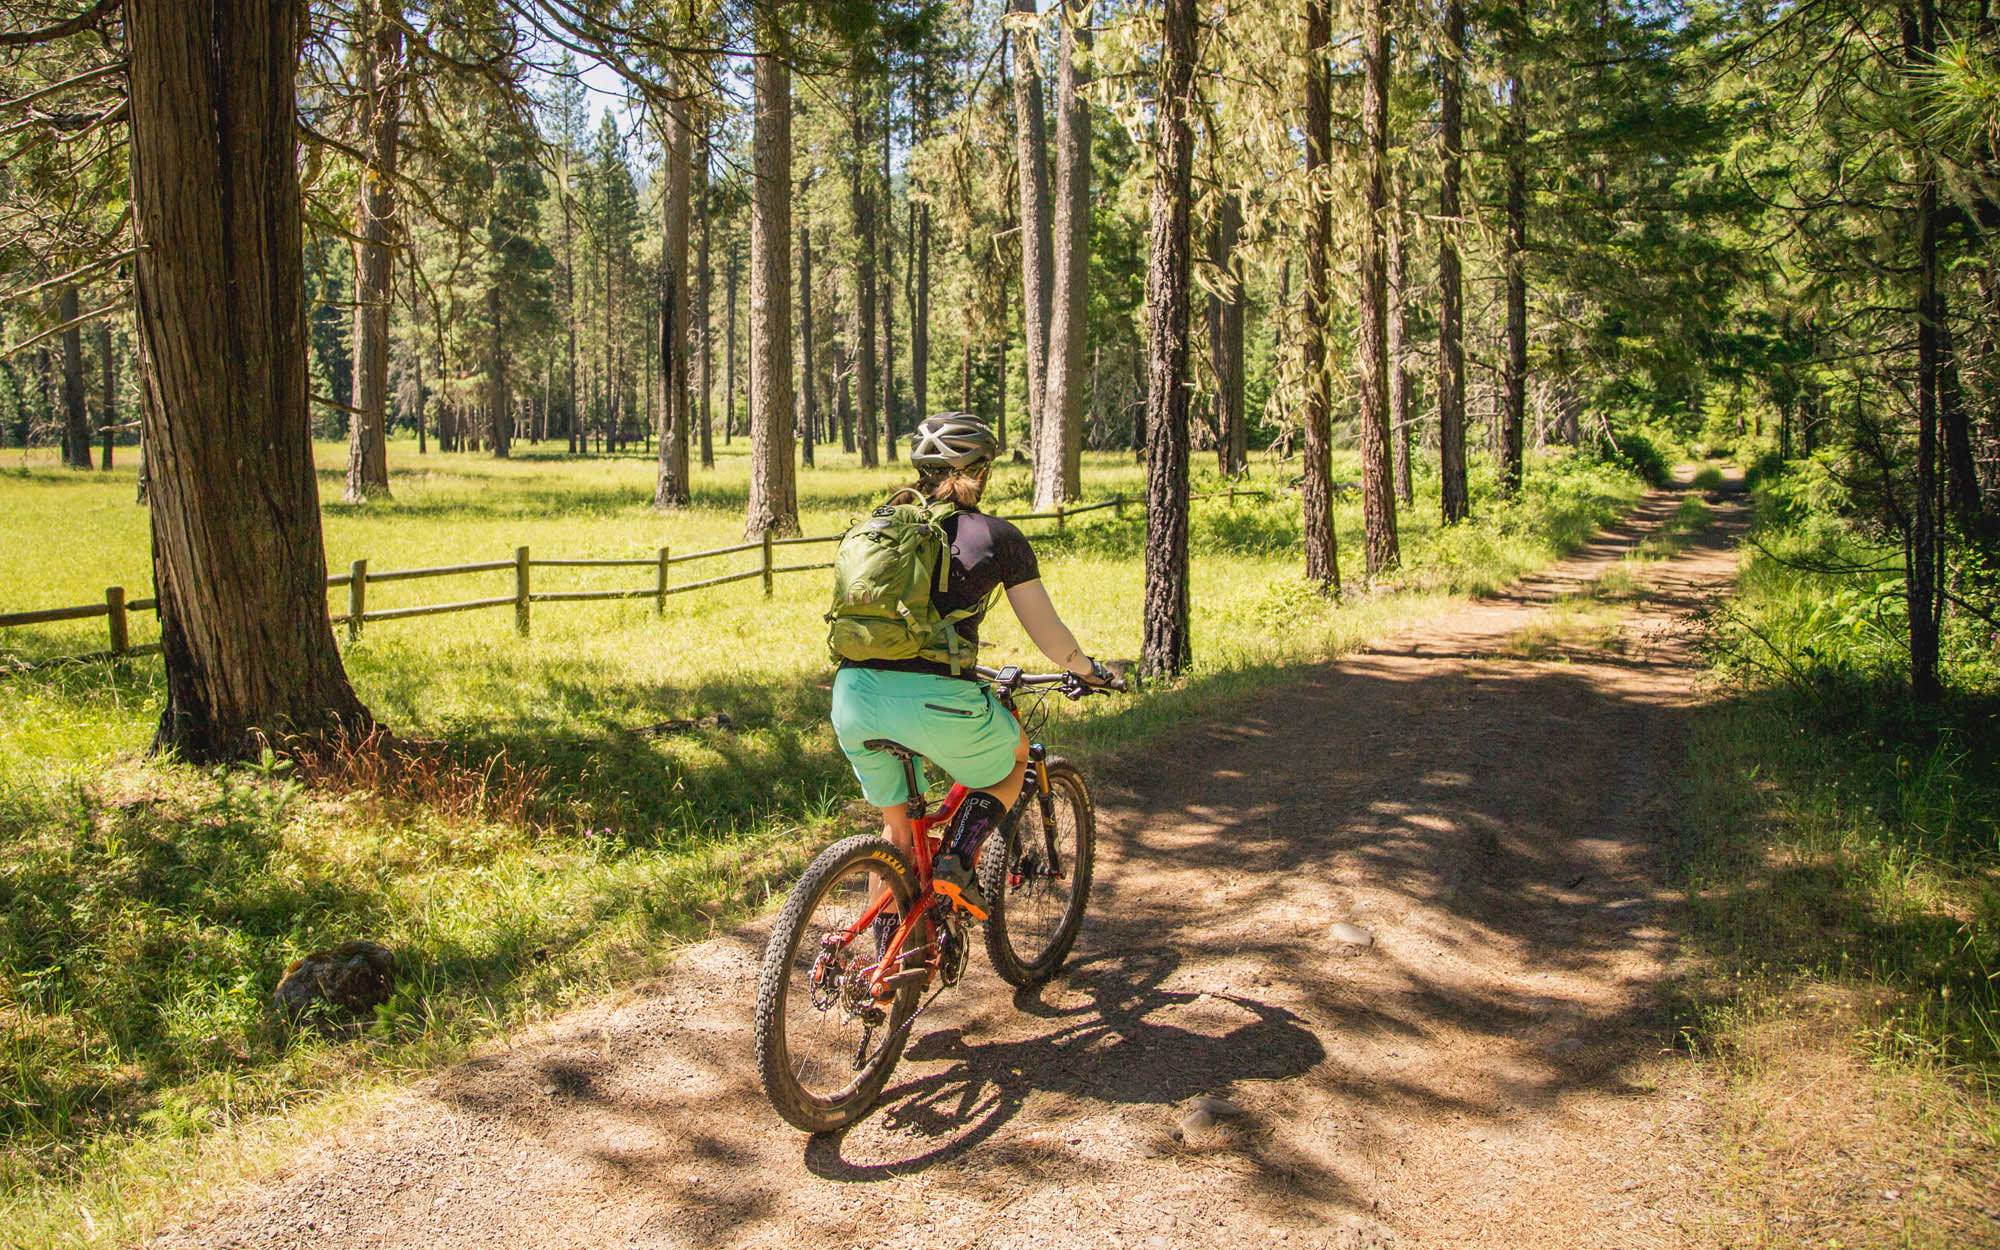 A mountain biker takes a well-marked path next to a fenced meadow.